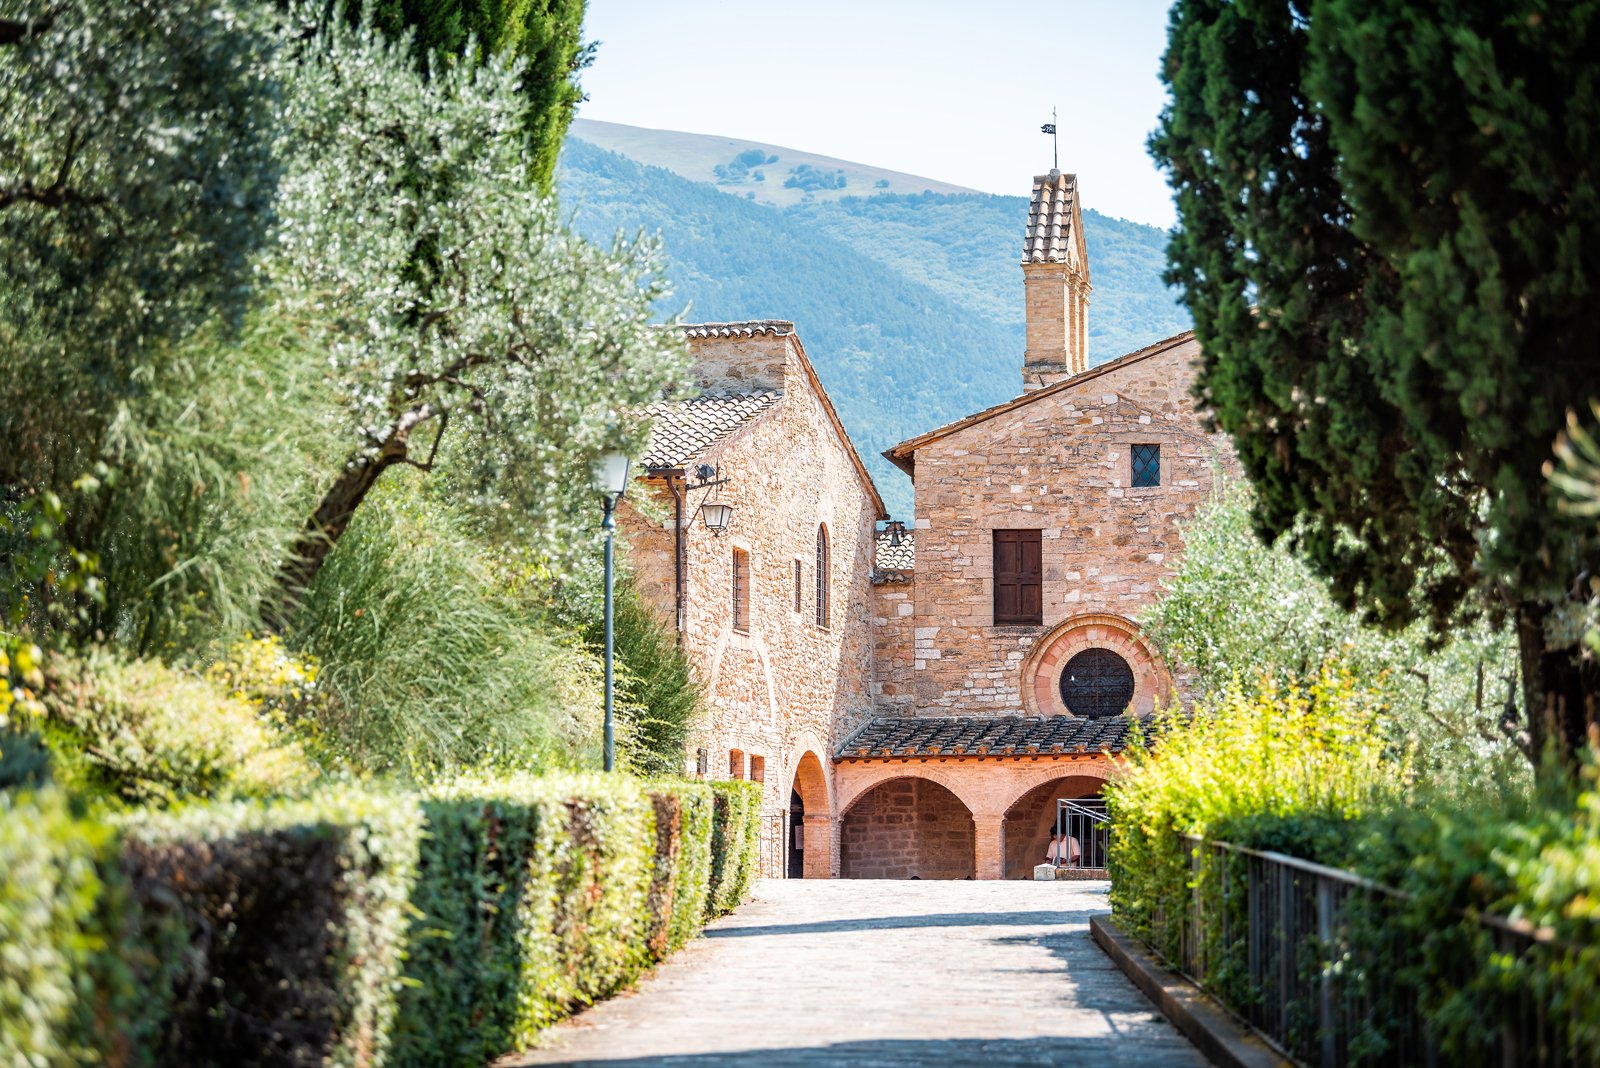 The approach to San Damiano, outside Assisi